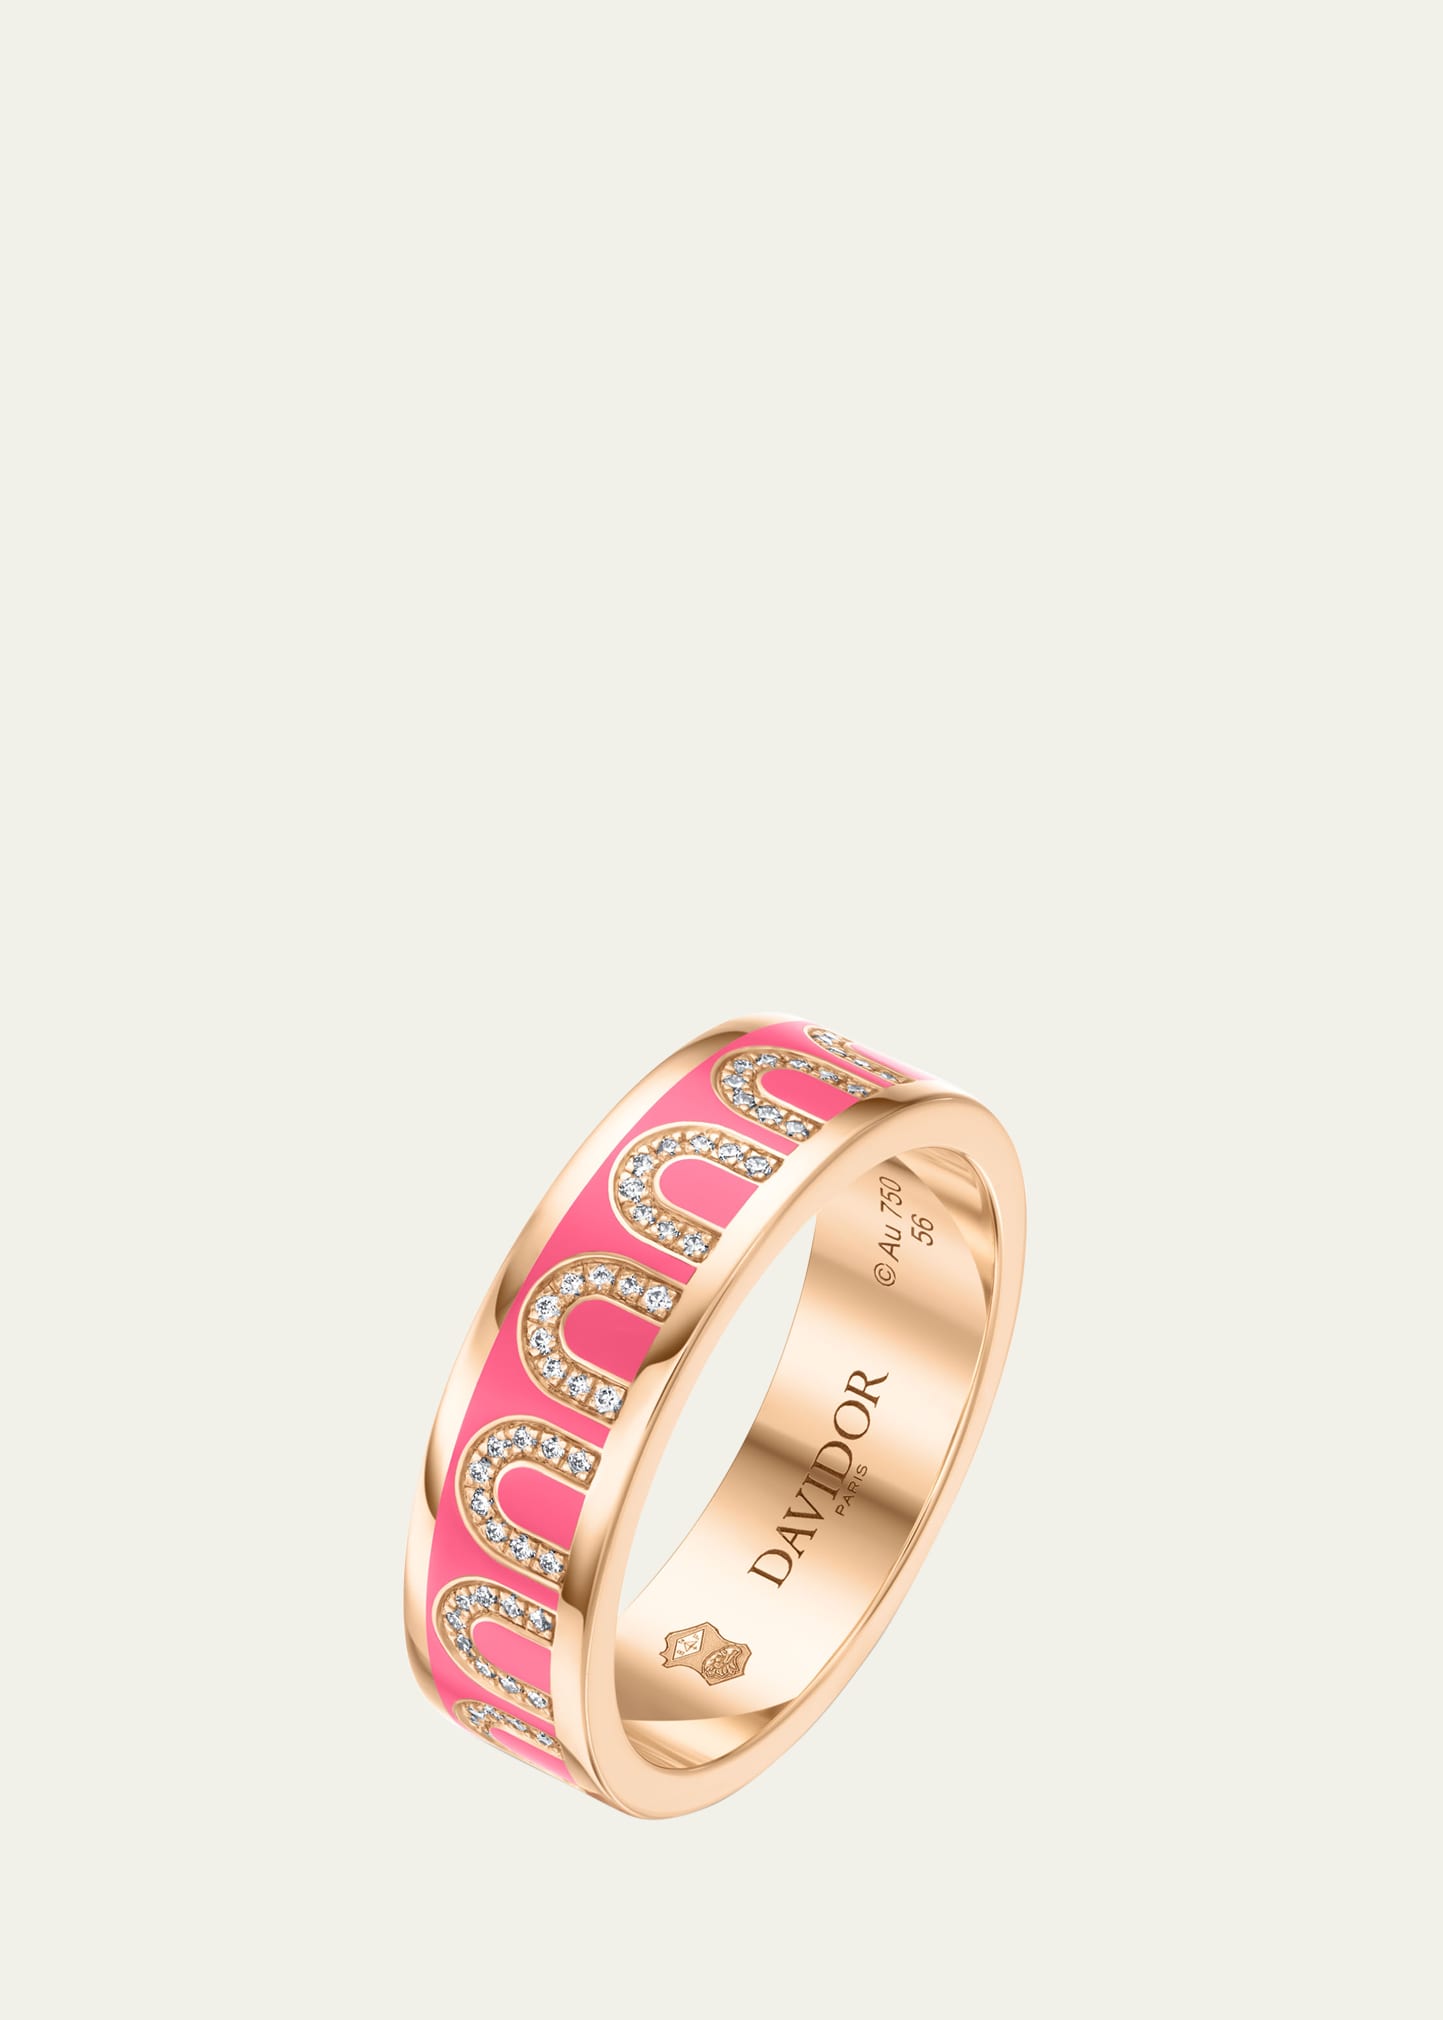 L'Arc de DAVIDOR Ring MM in 18K Rose Gold with Flamant Lacquered Ceramic and Arcade Diamonds